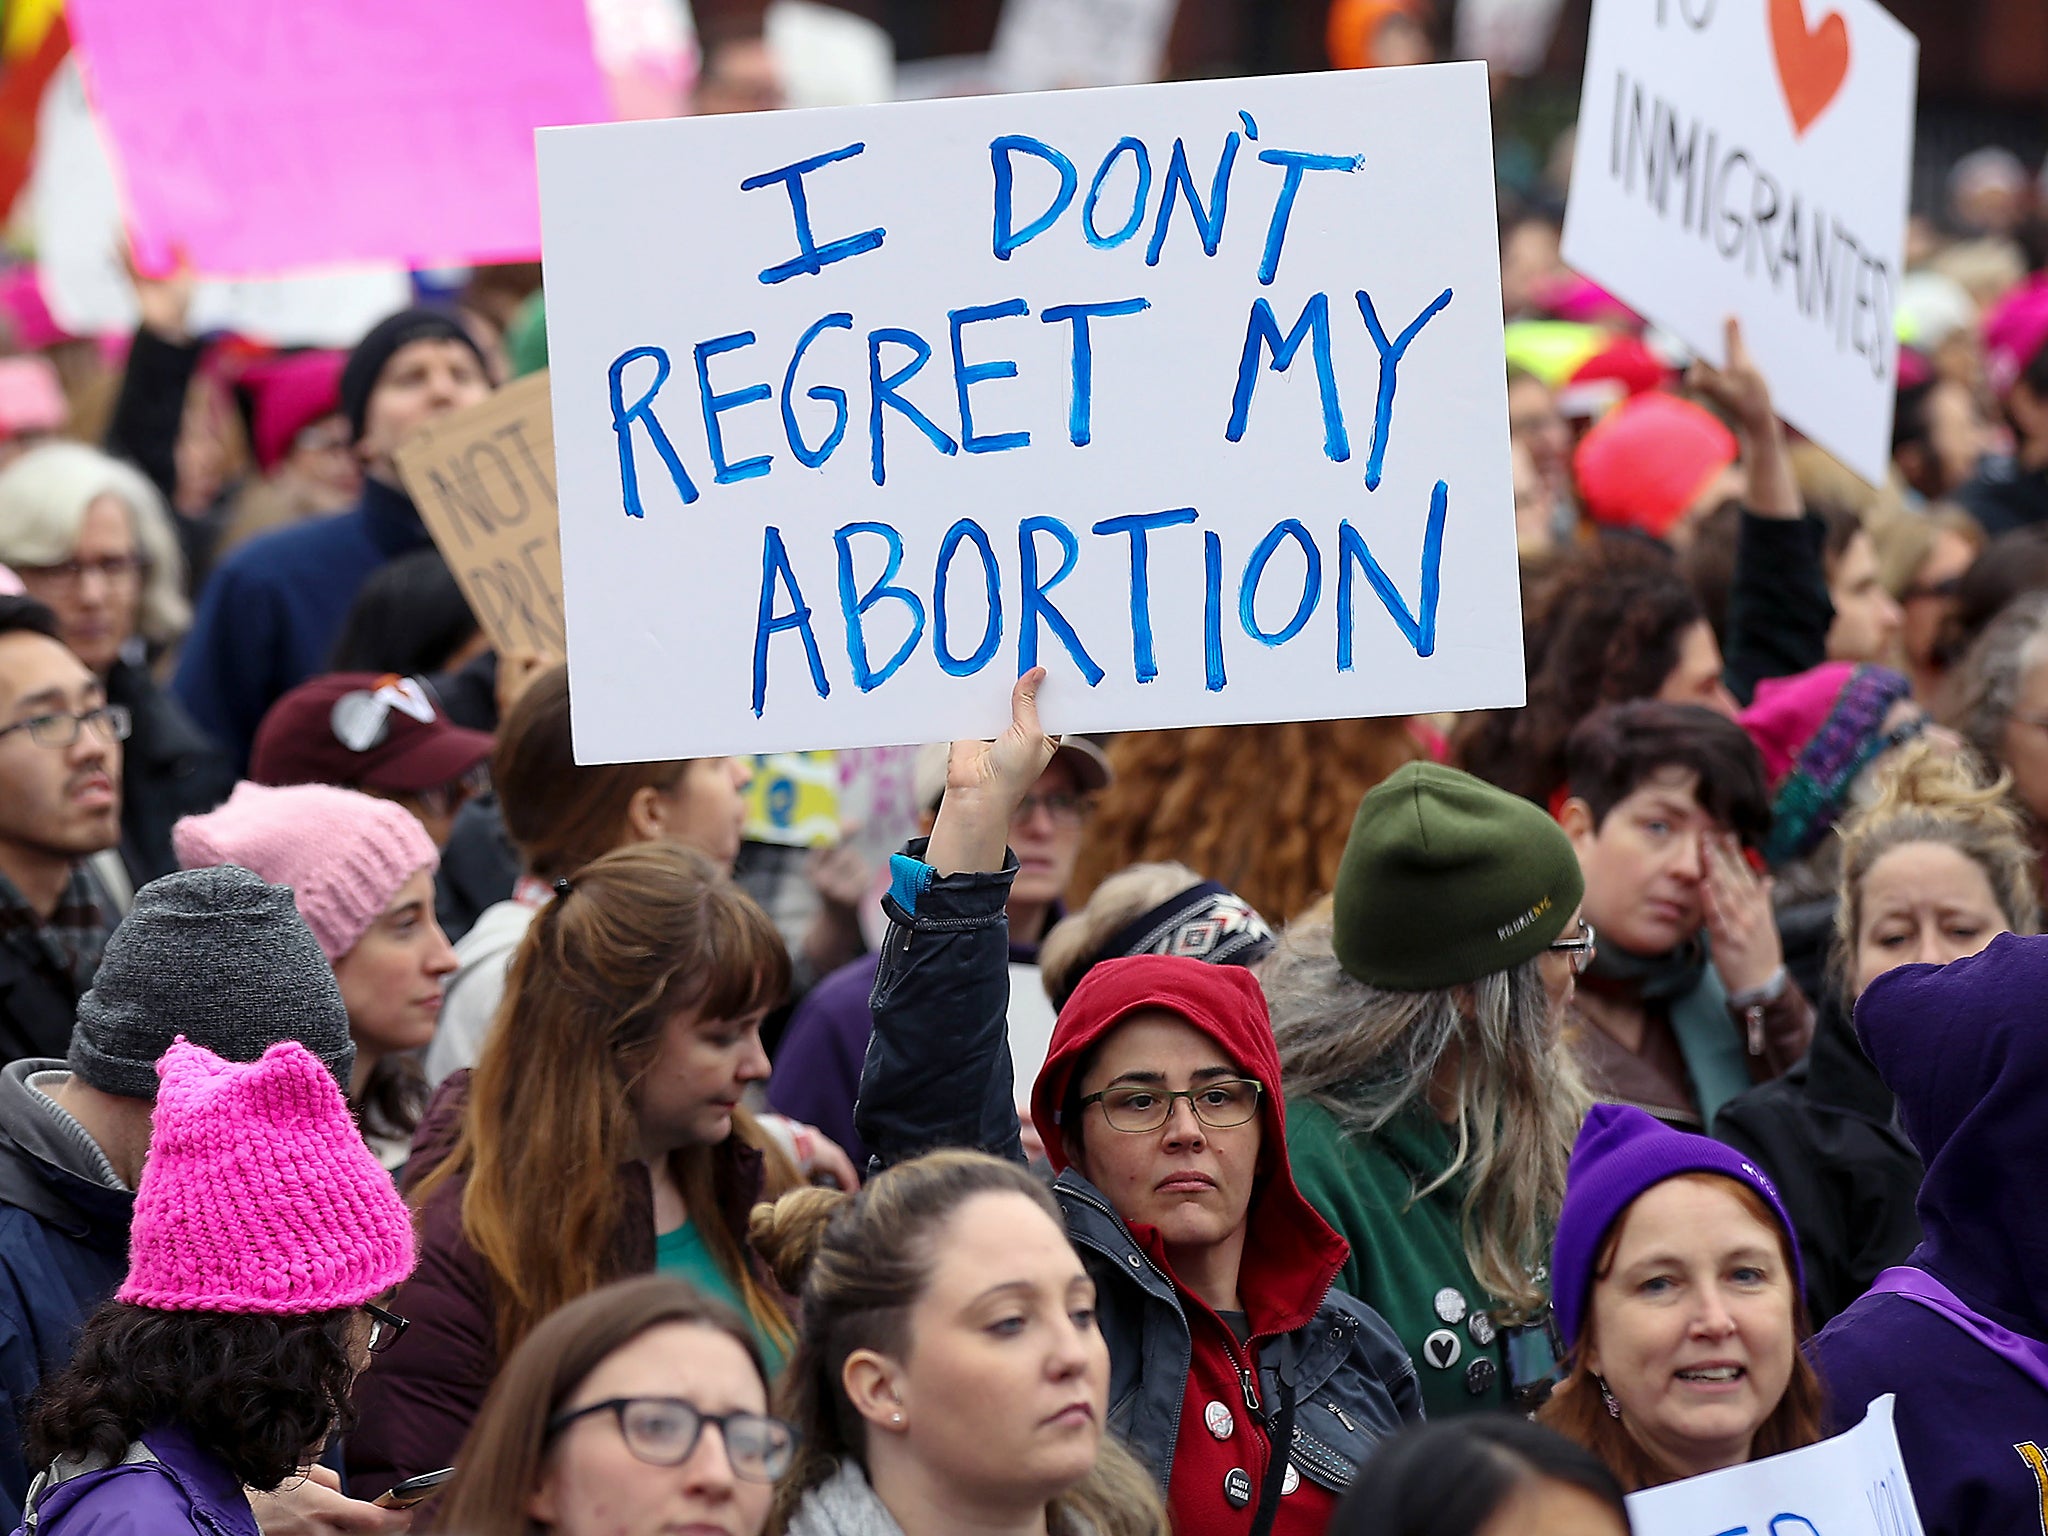 Women in the US will now have restricted access to abortions